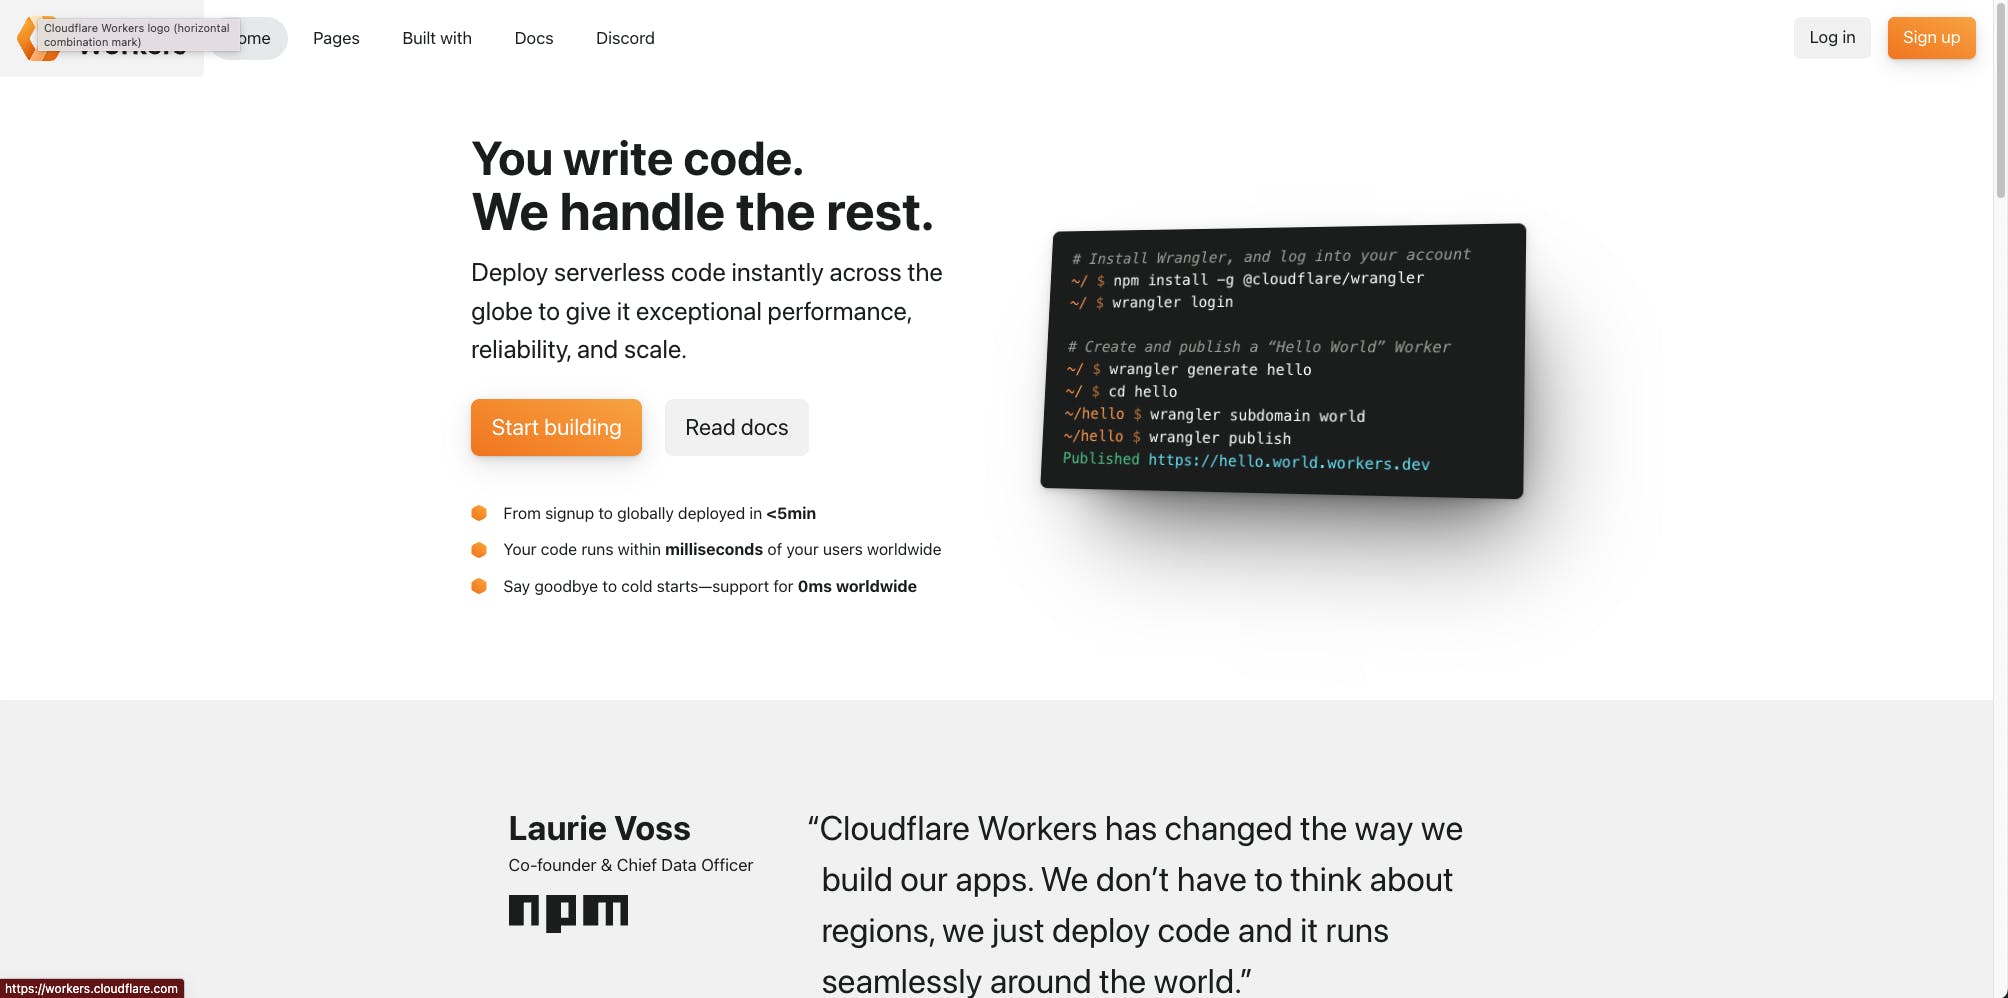 Screenshot of the CloudFlare Workers’ website